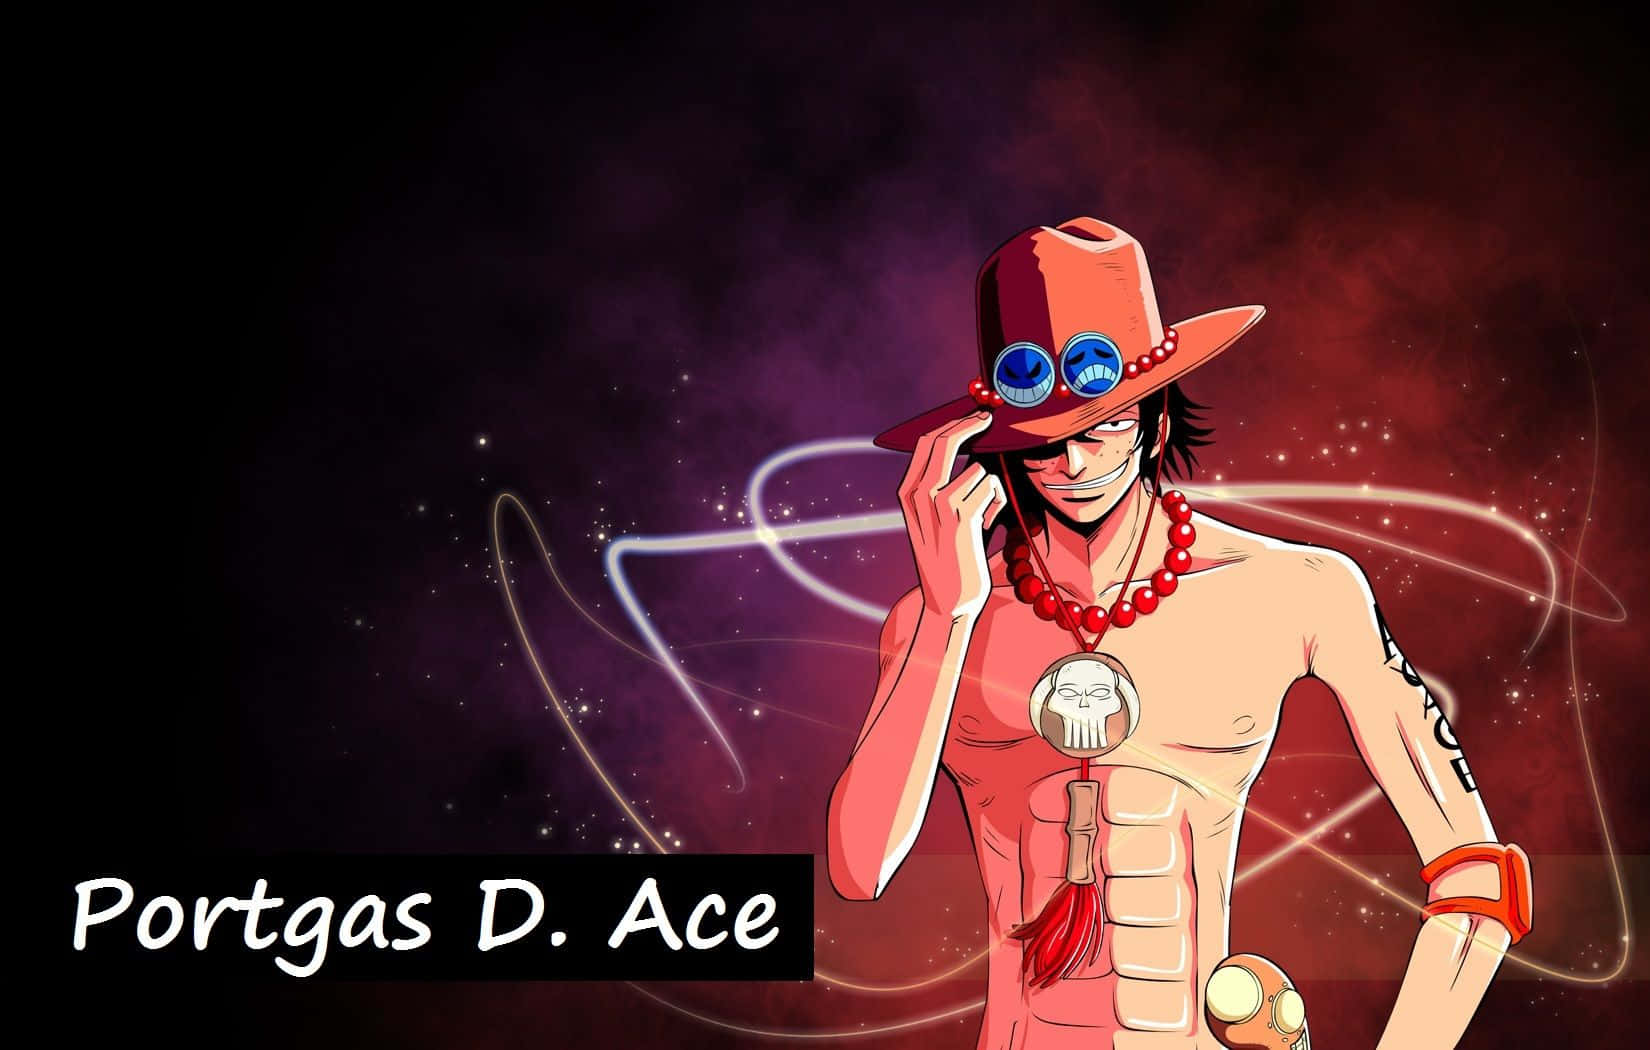 Take Command - The Fiery Portgas D. Ace